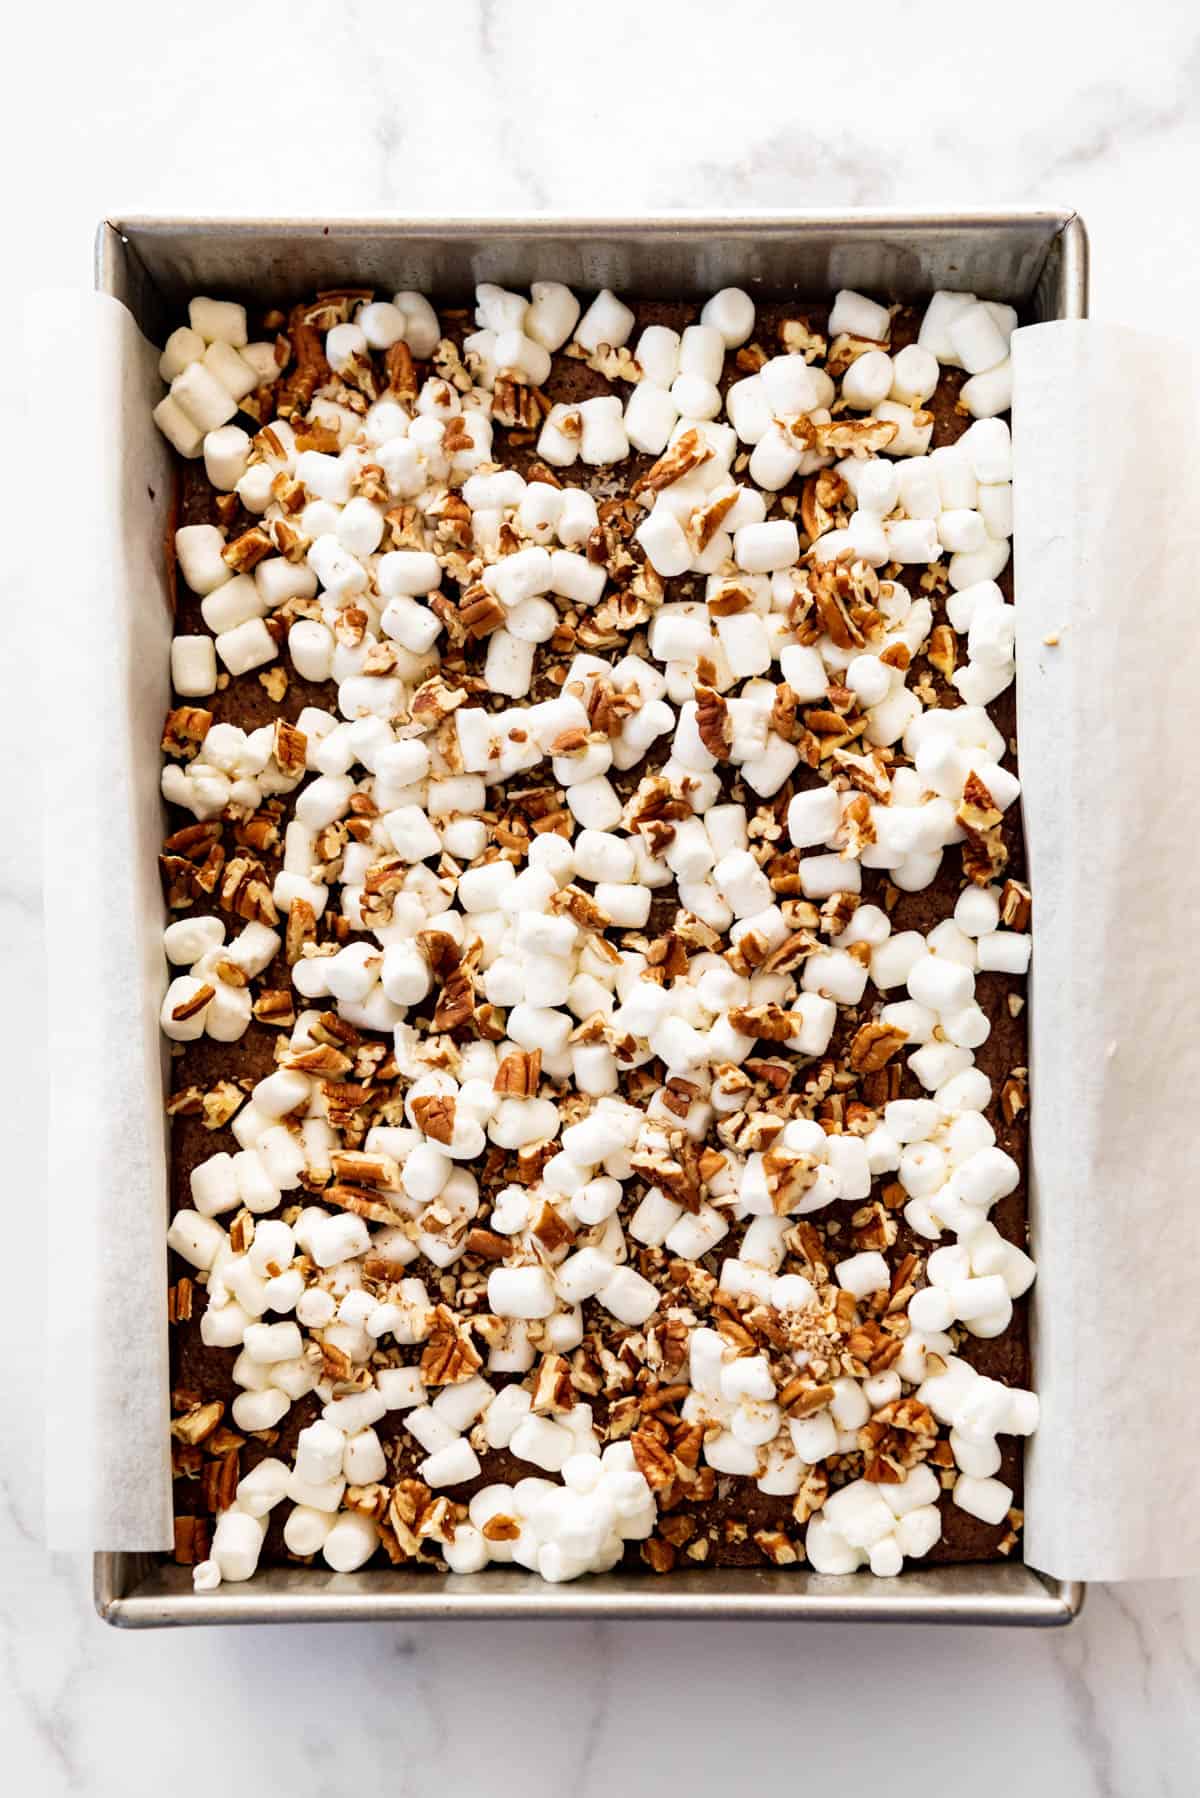 Chopped pecans sprinkled on top of marshmallows and brownies.